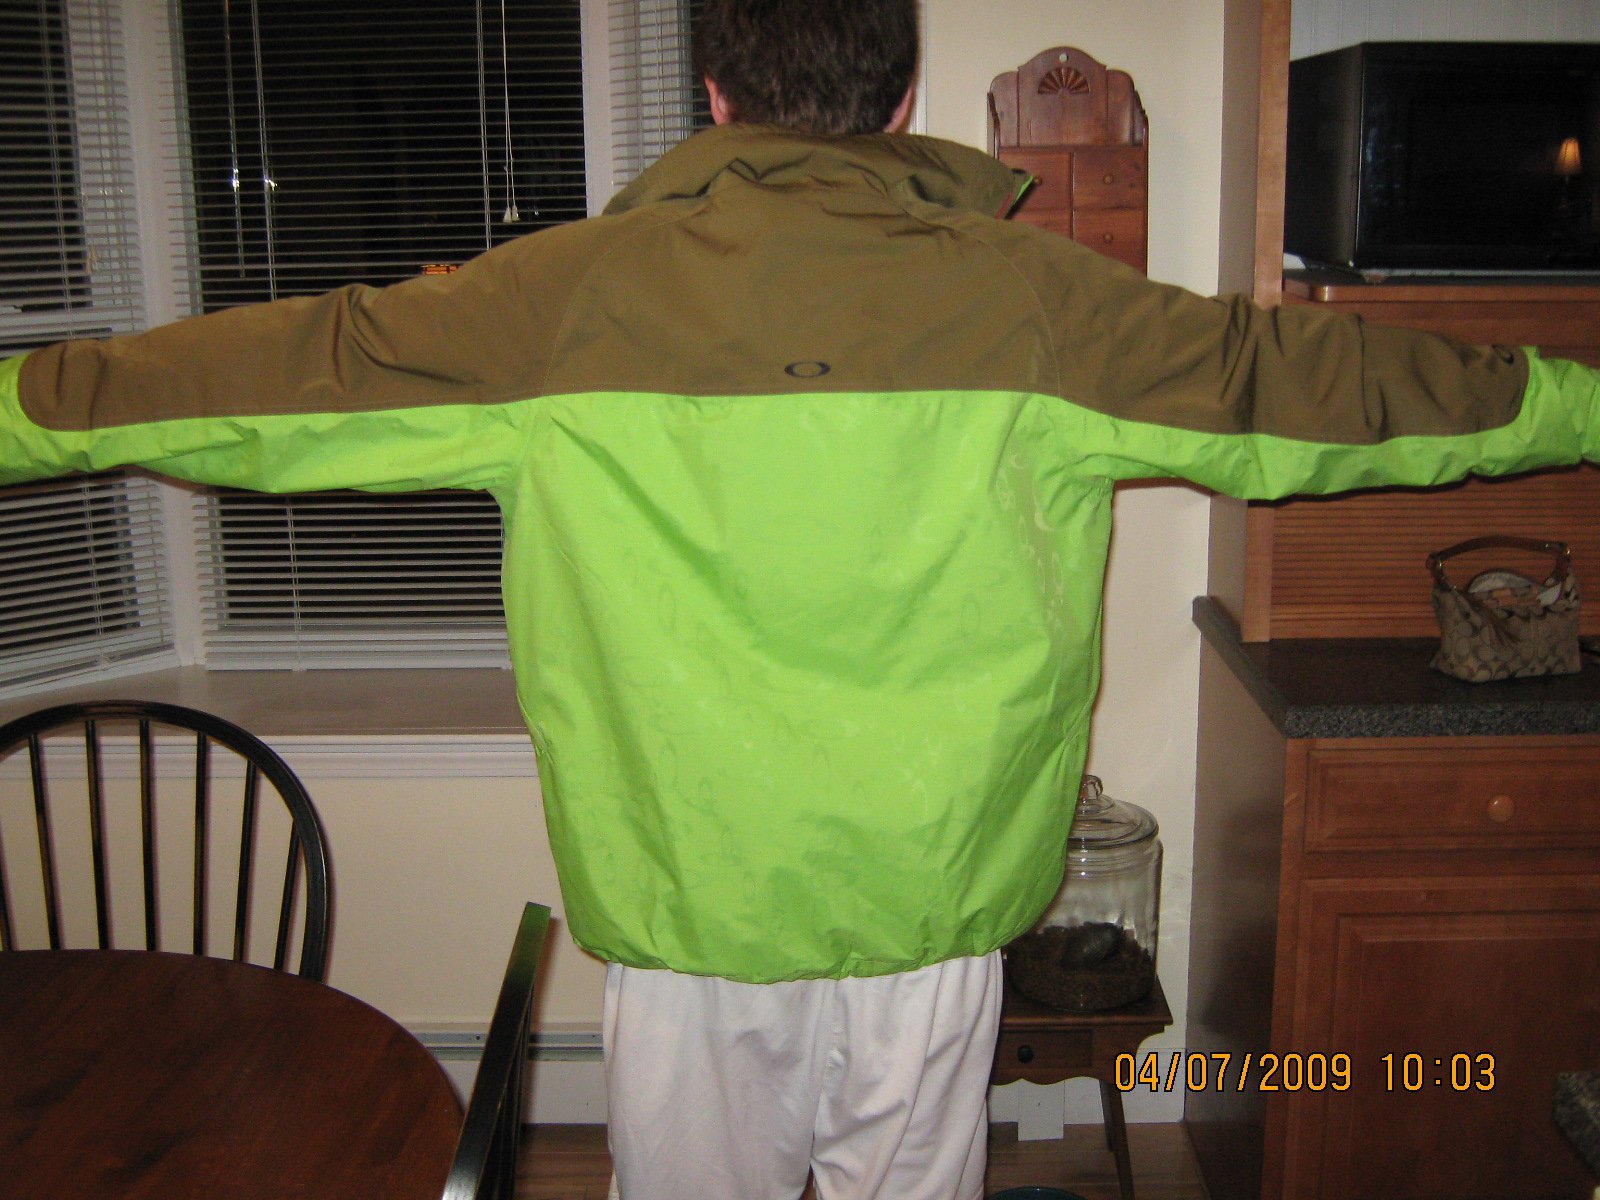 Other PIc of Jacket